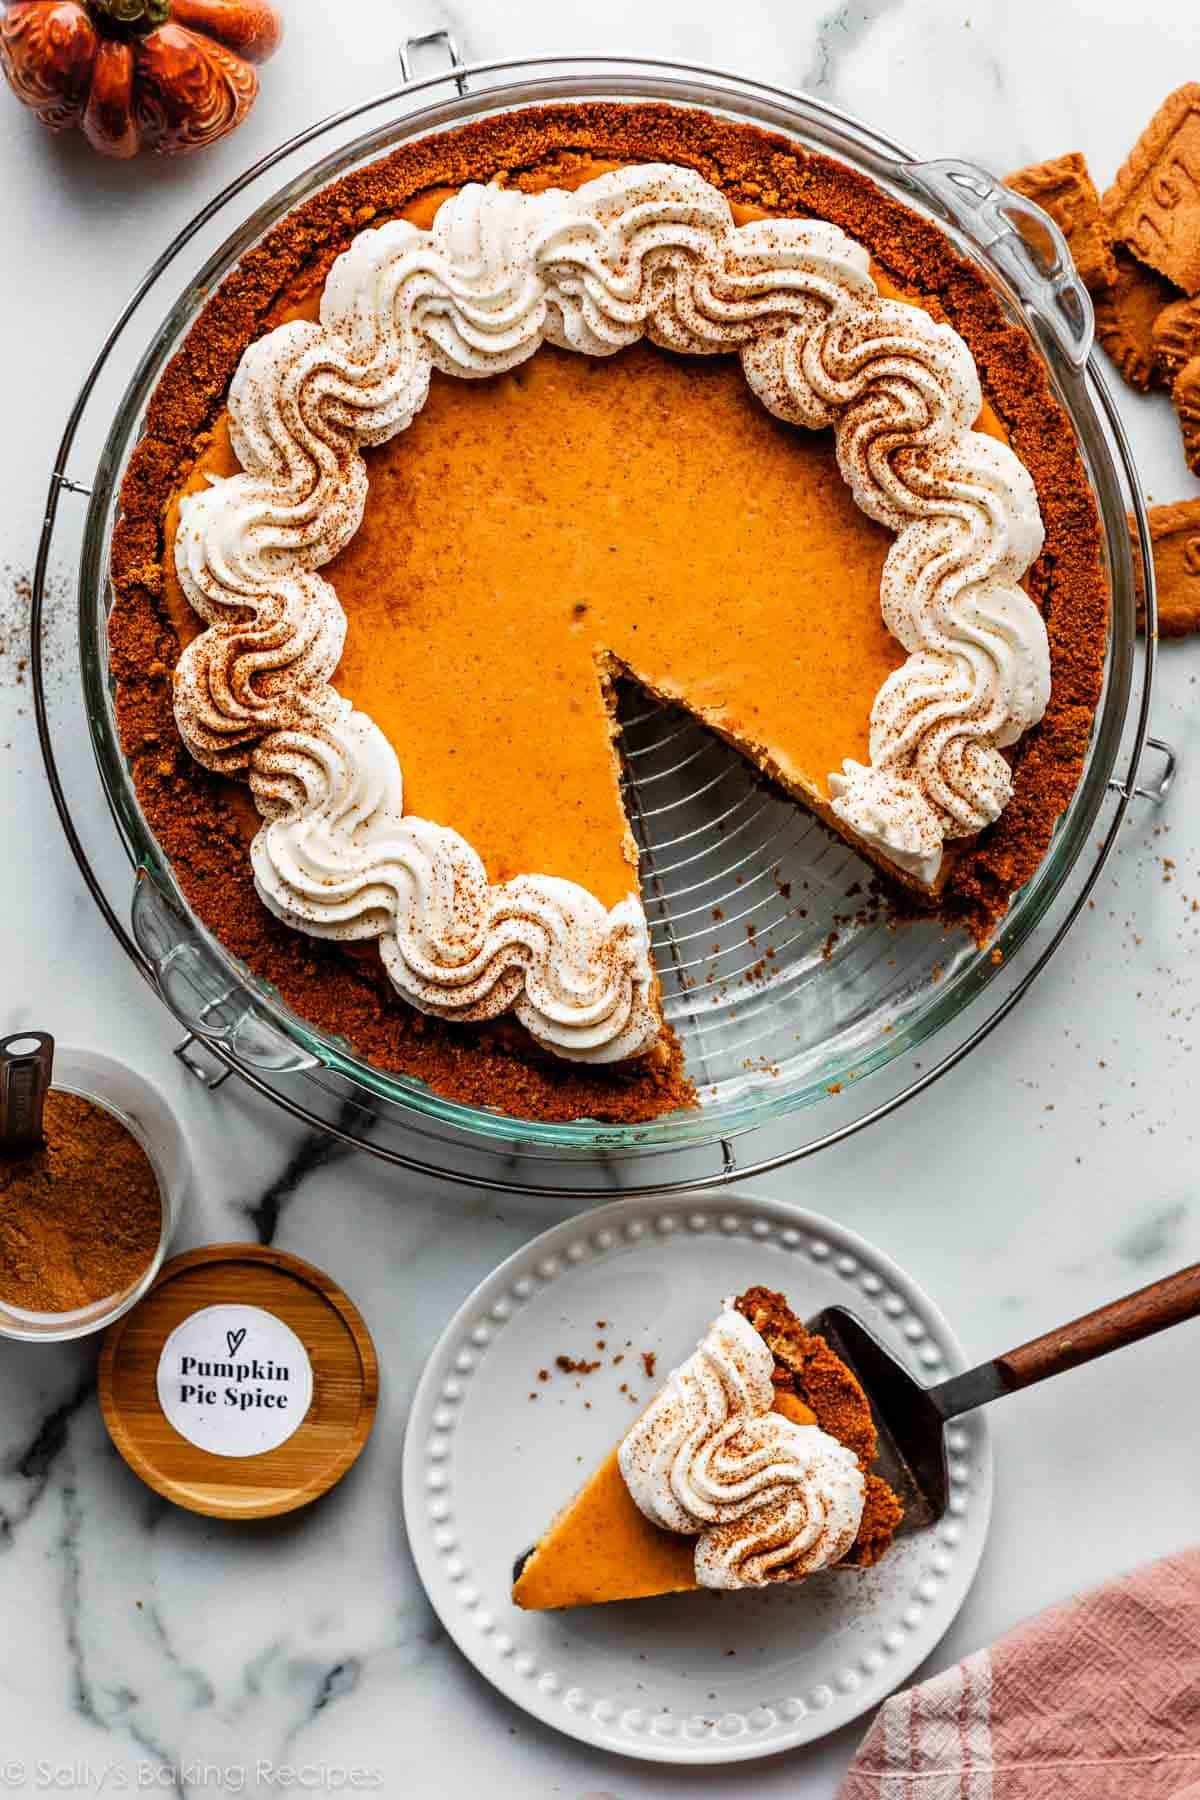 pumpkin cheesecake pie with whipped cream around the border and 1 slice removed and shown on plate.